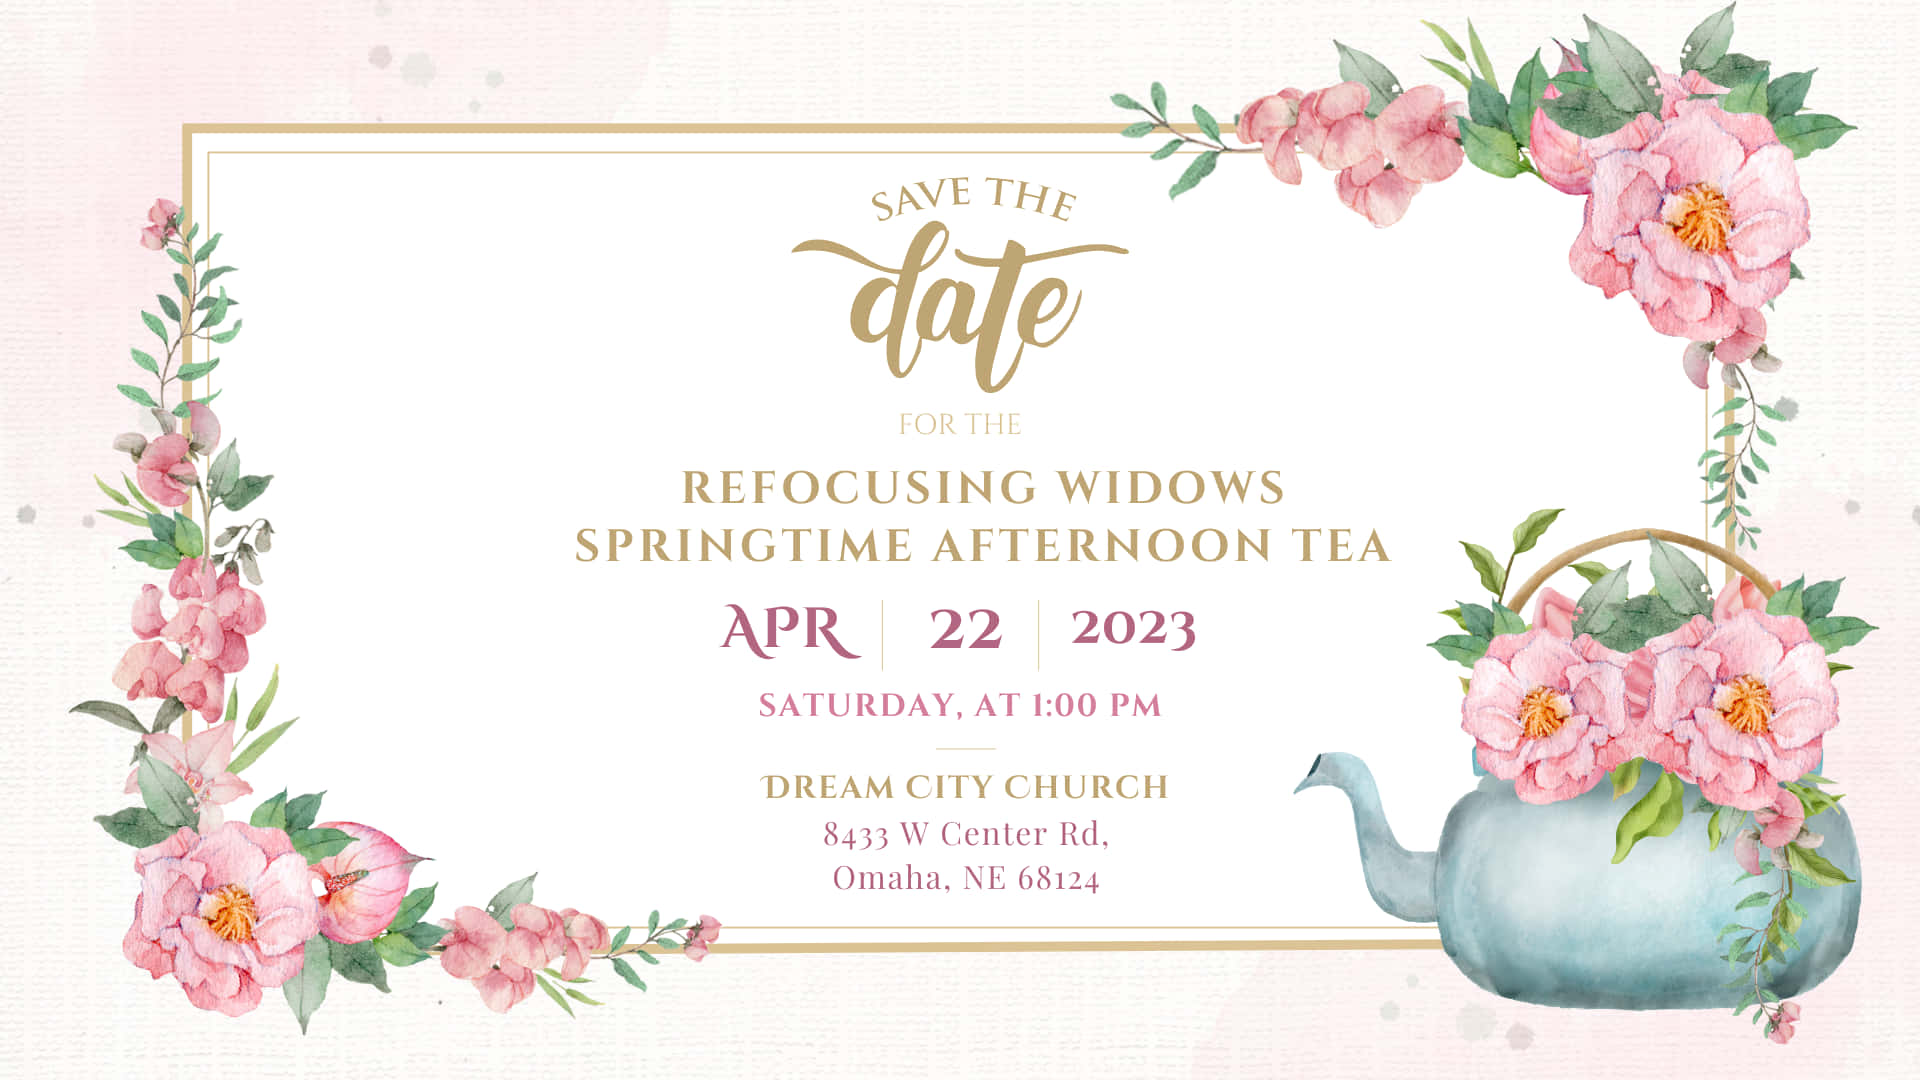 "Make the Moment Special with a Tea Party"